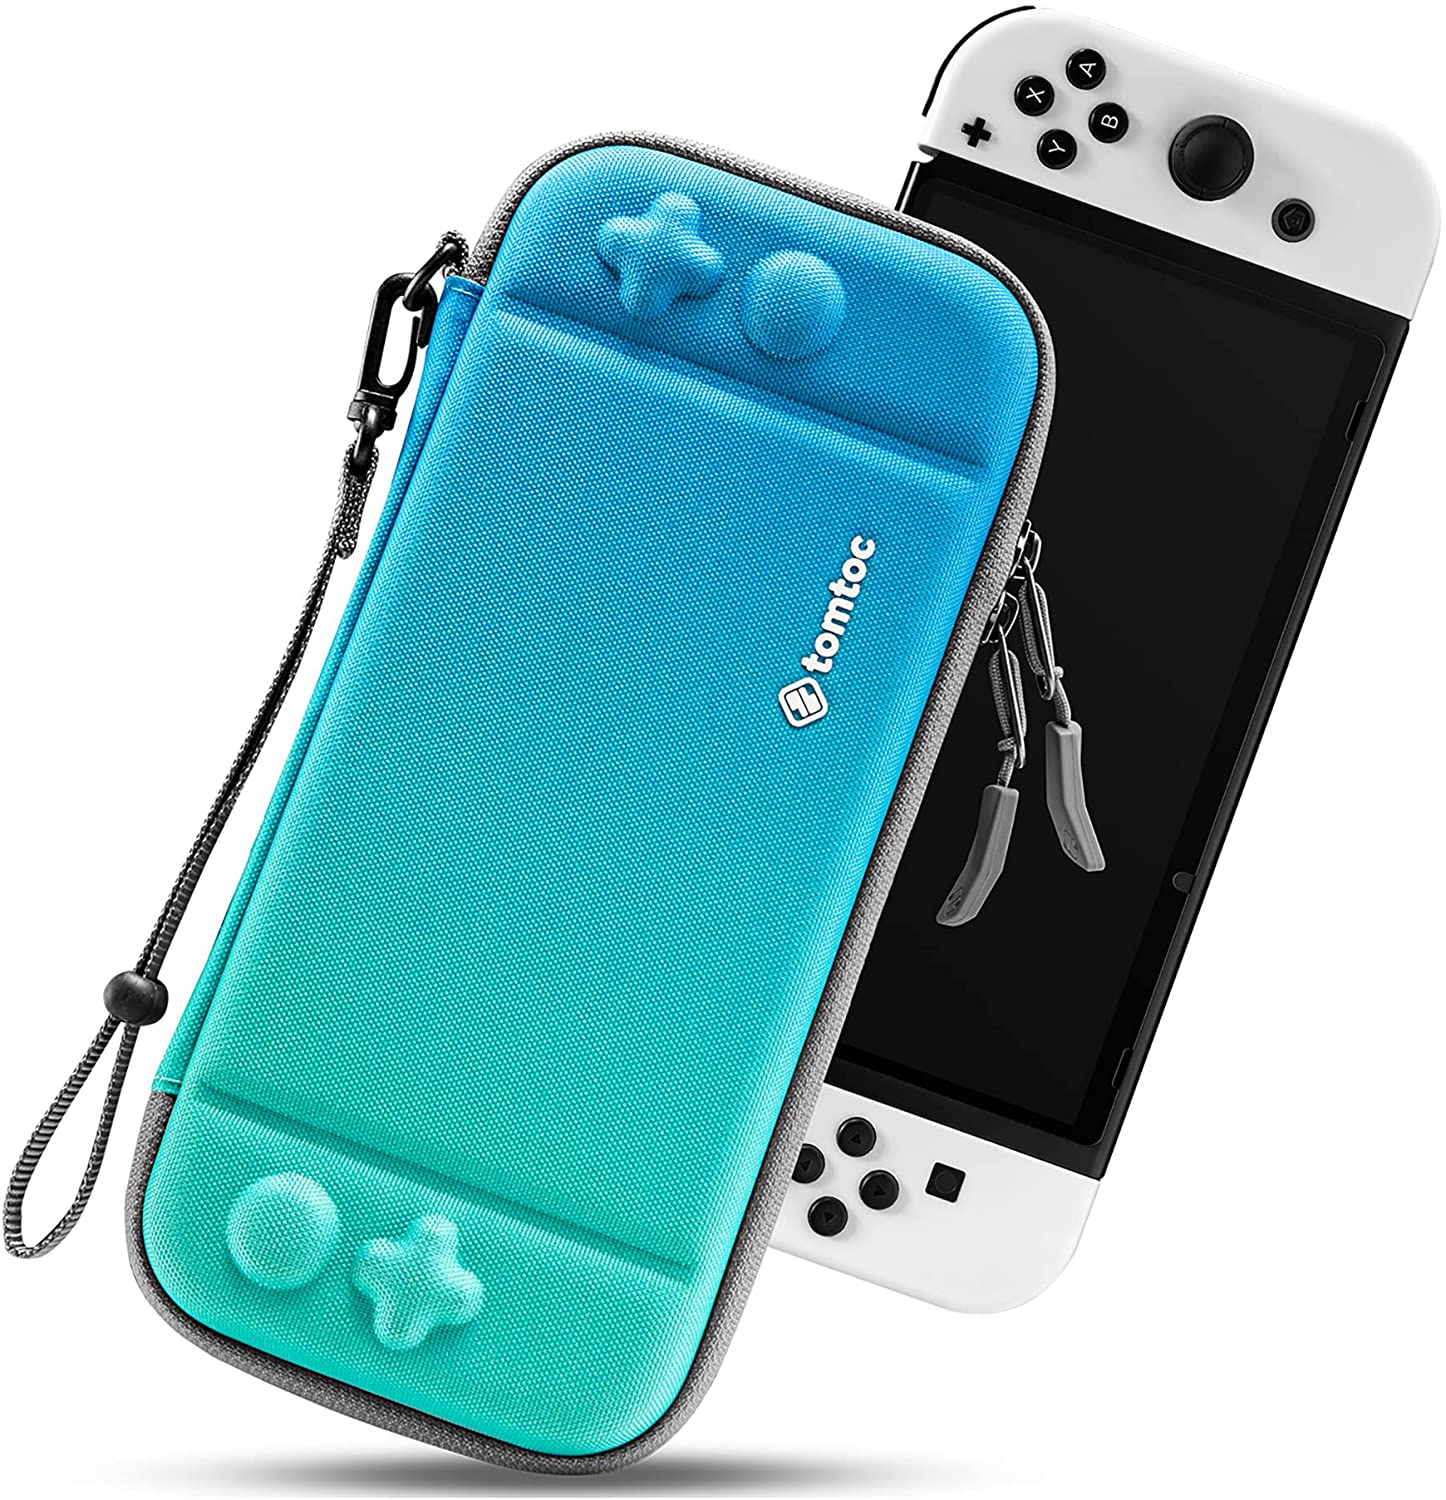 Tomtoc Ultra Thin Switch Oled Case Blue